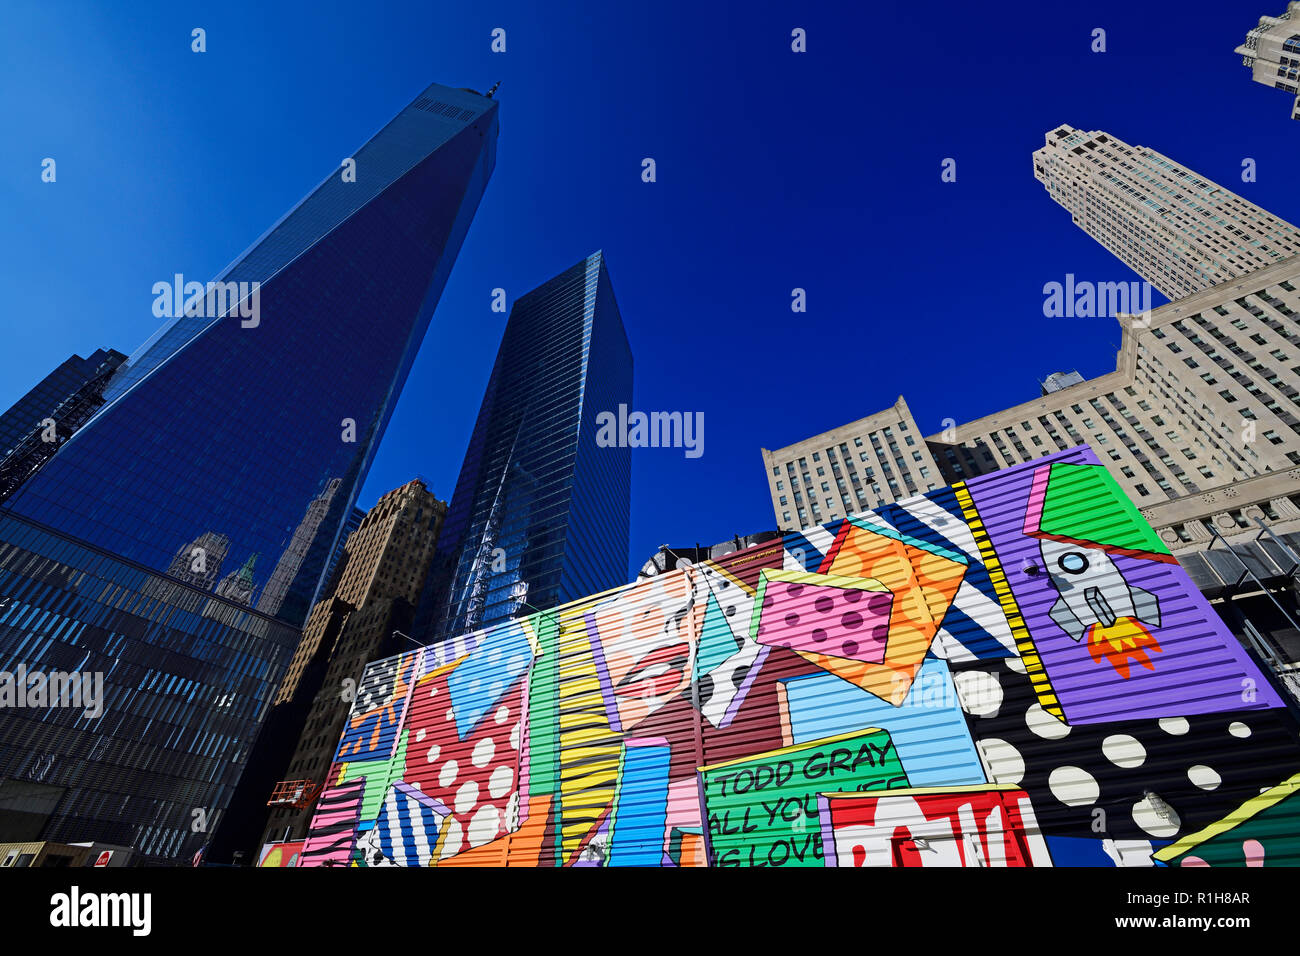 Building site with graffiti decorated walls in front of One World Trade Center Transportation Hub, Ground Zero, Manhattan Stock Photo